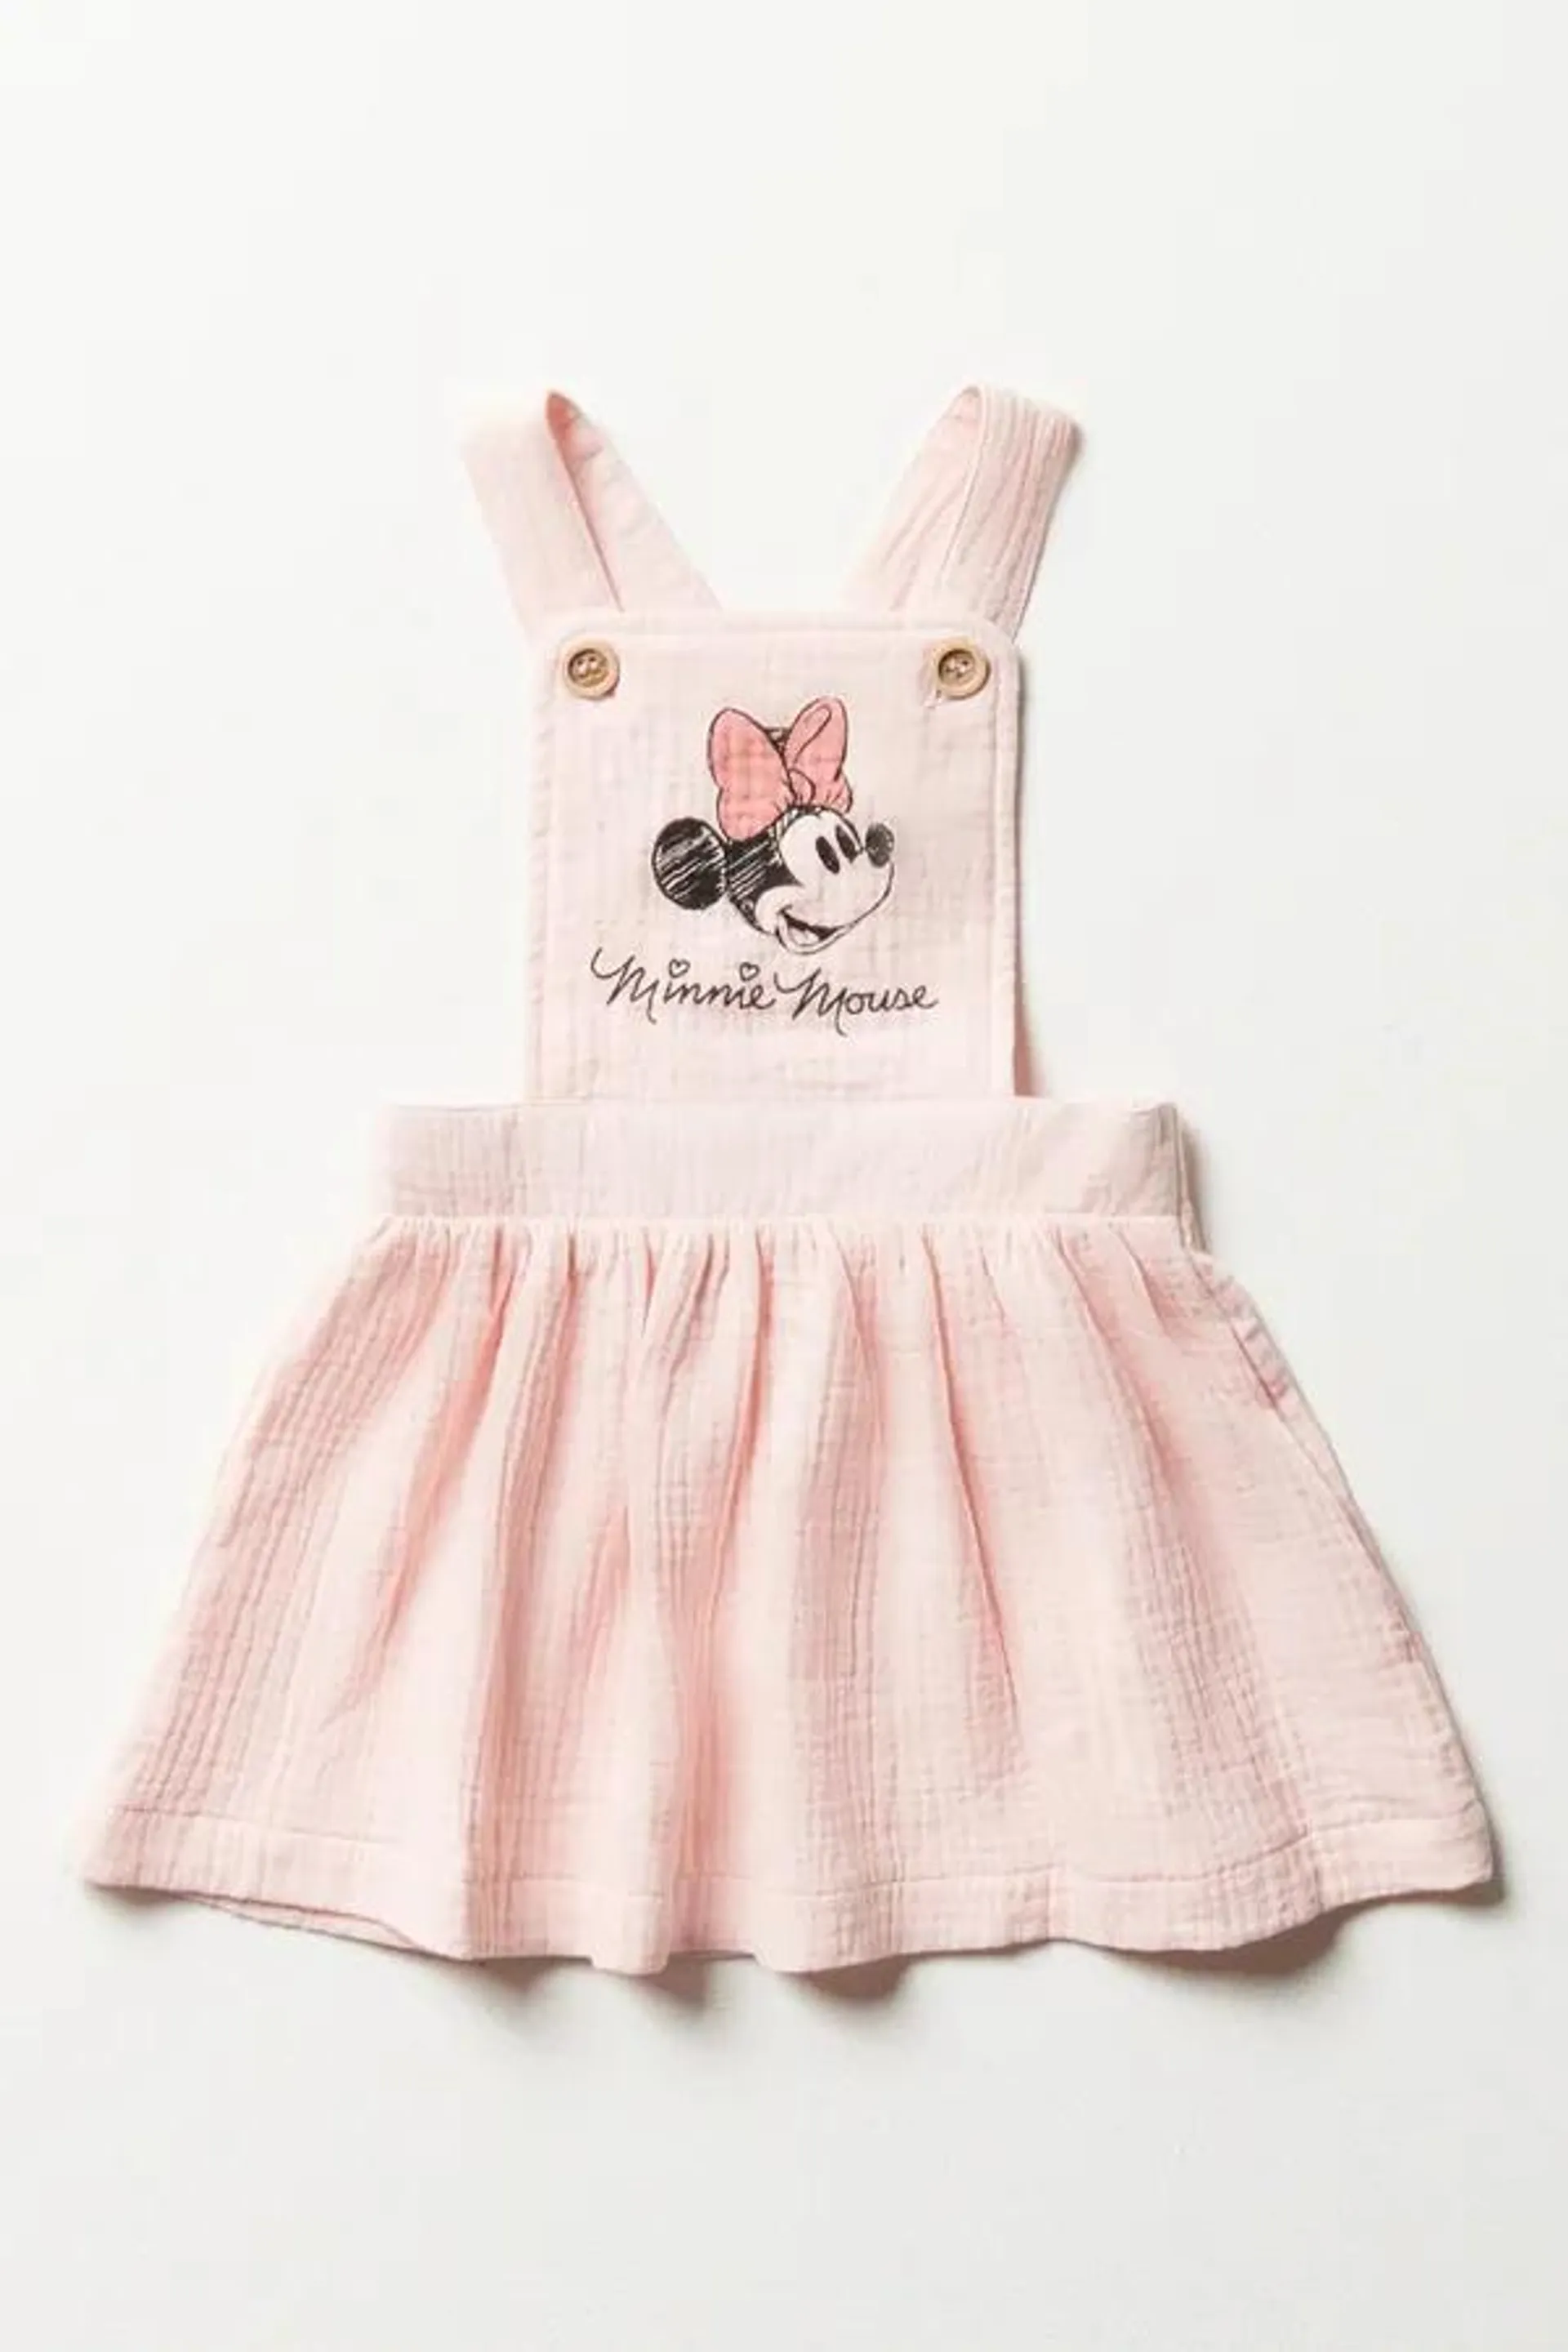 Minnie Mouse pinafore dress pink